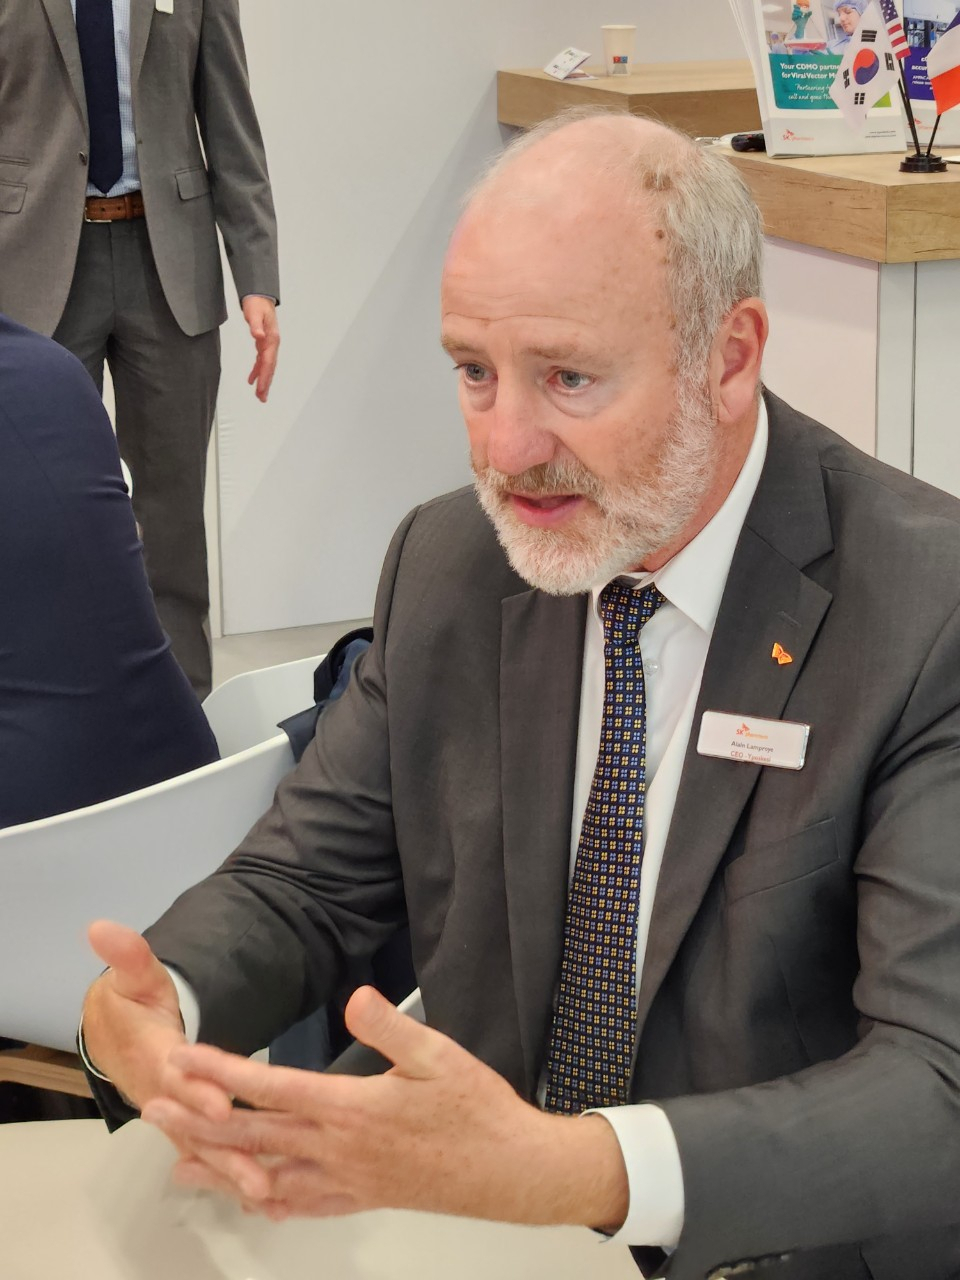 Alain Lamproye, CEO of Yposkesi, speaks to The Korea Herald at the Convention on Pharmaceutical Ingredients in Frankfurt, Germany, on Tuesday. (Kan Hyeong-woo/The Korea Herald)